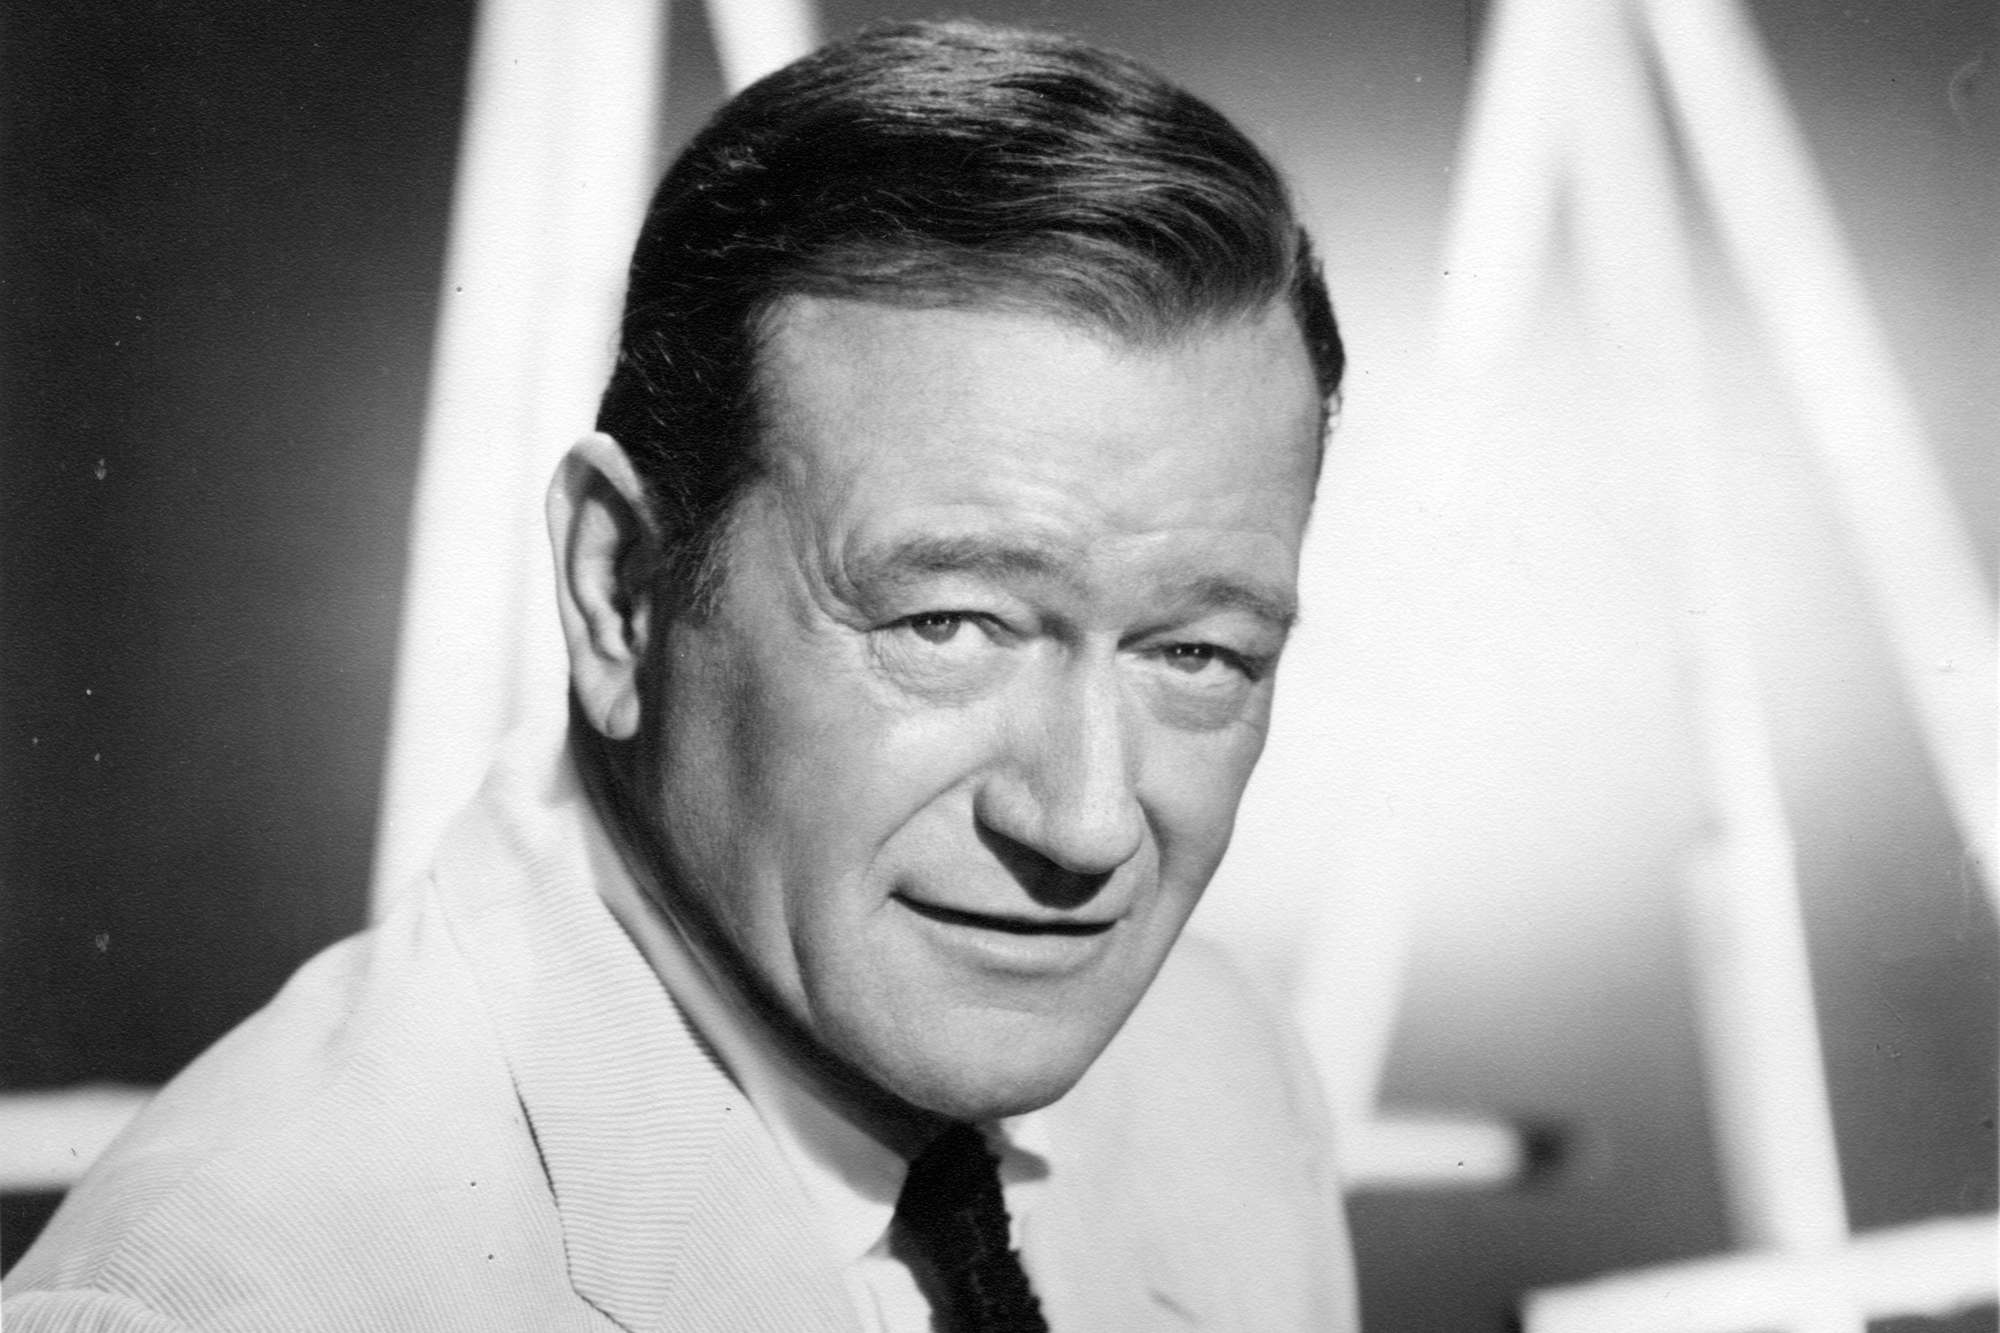 Movie star John Wayne wearing a suit and tie in a black-and-white picture with a slight smile